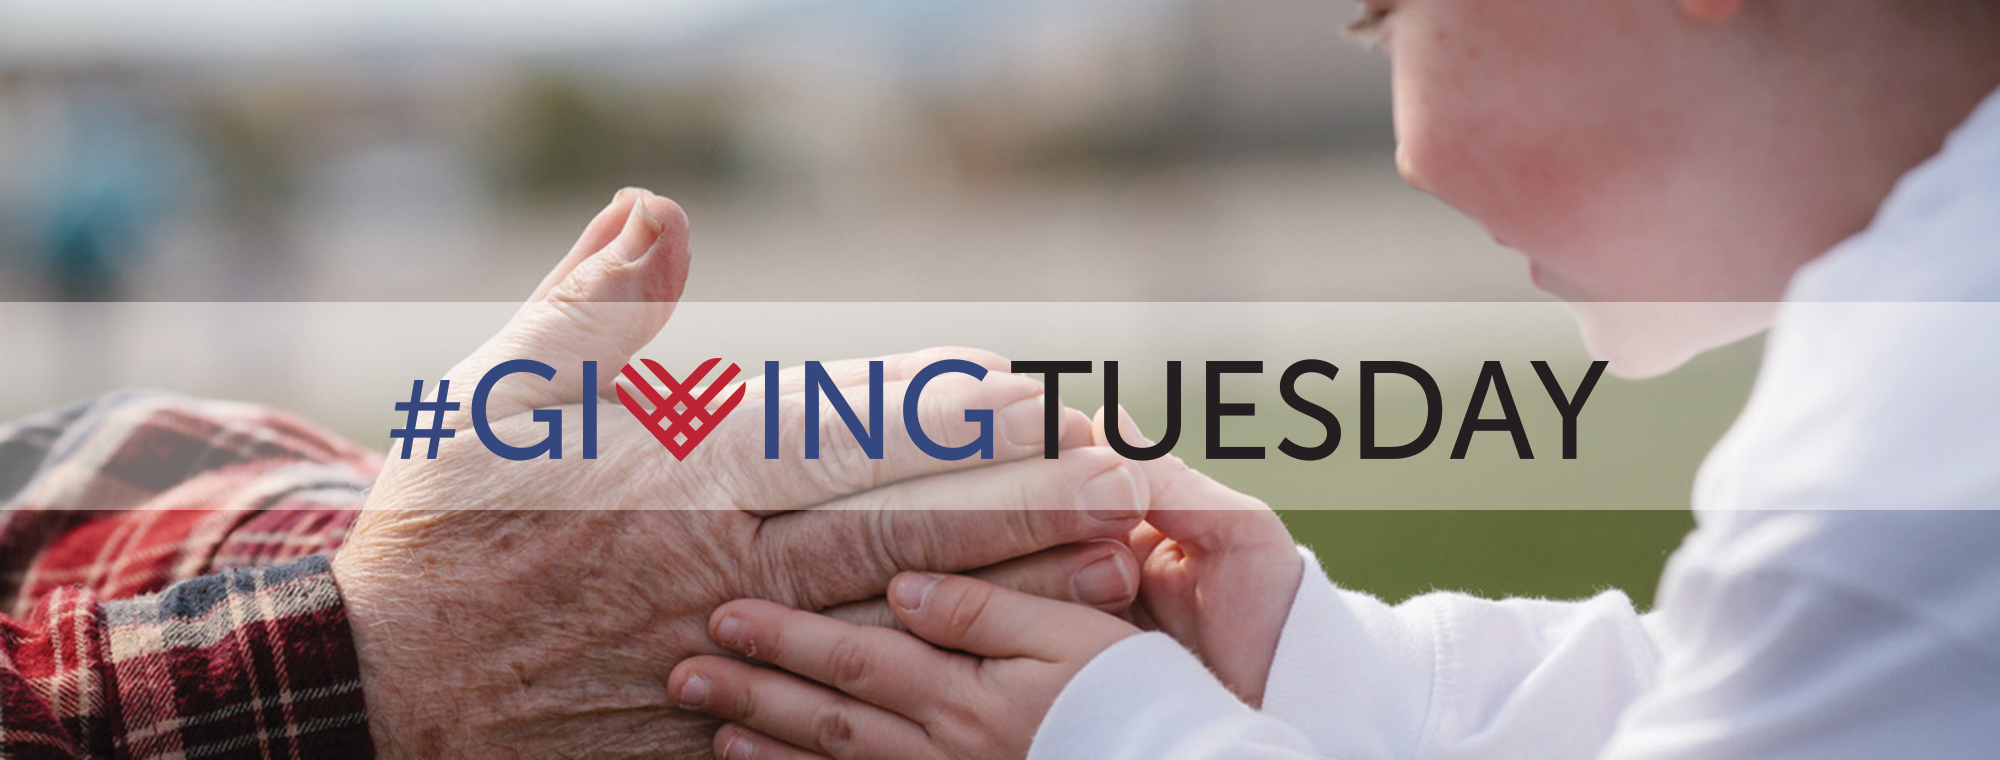 Giving Tuesday 2019